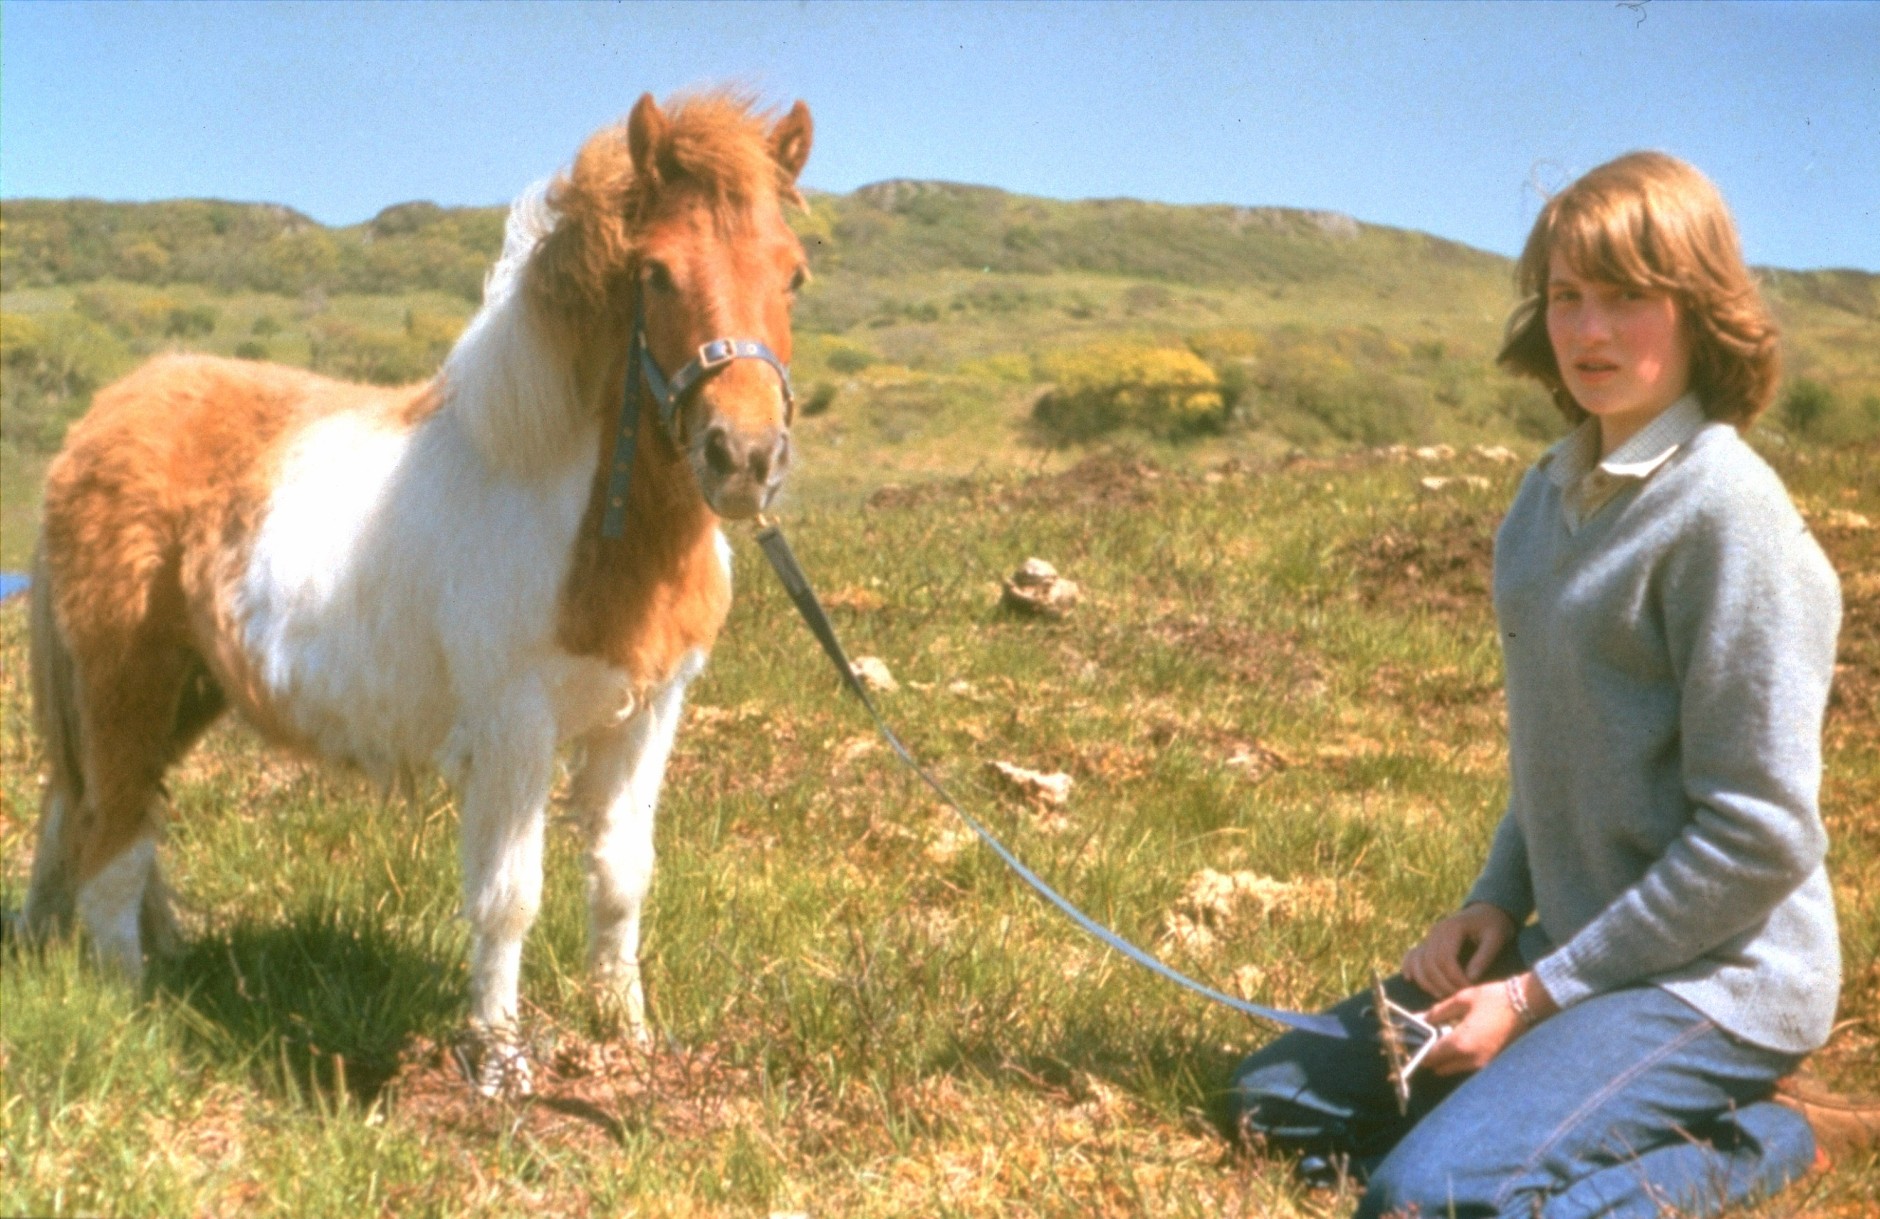 Family album picture of Lady Diana Spencer with Souffle, a Shetland pony, at her mother's home in Scotland during the summer of 1974.  (AP Photo/ho)